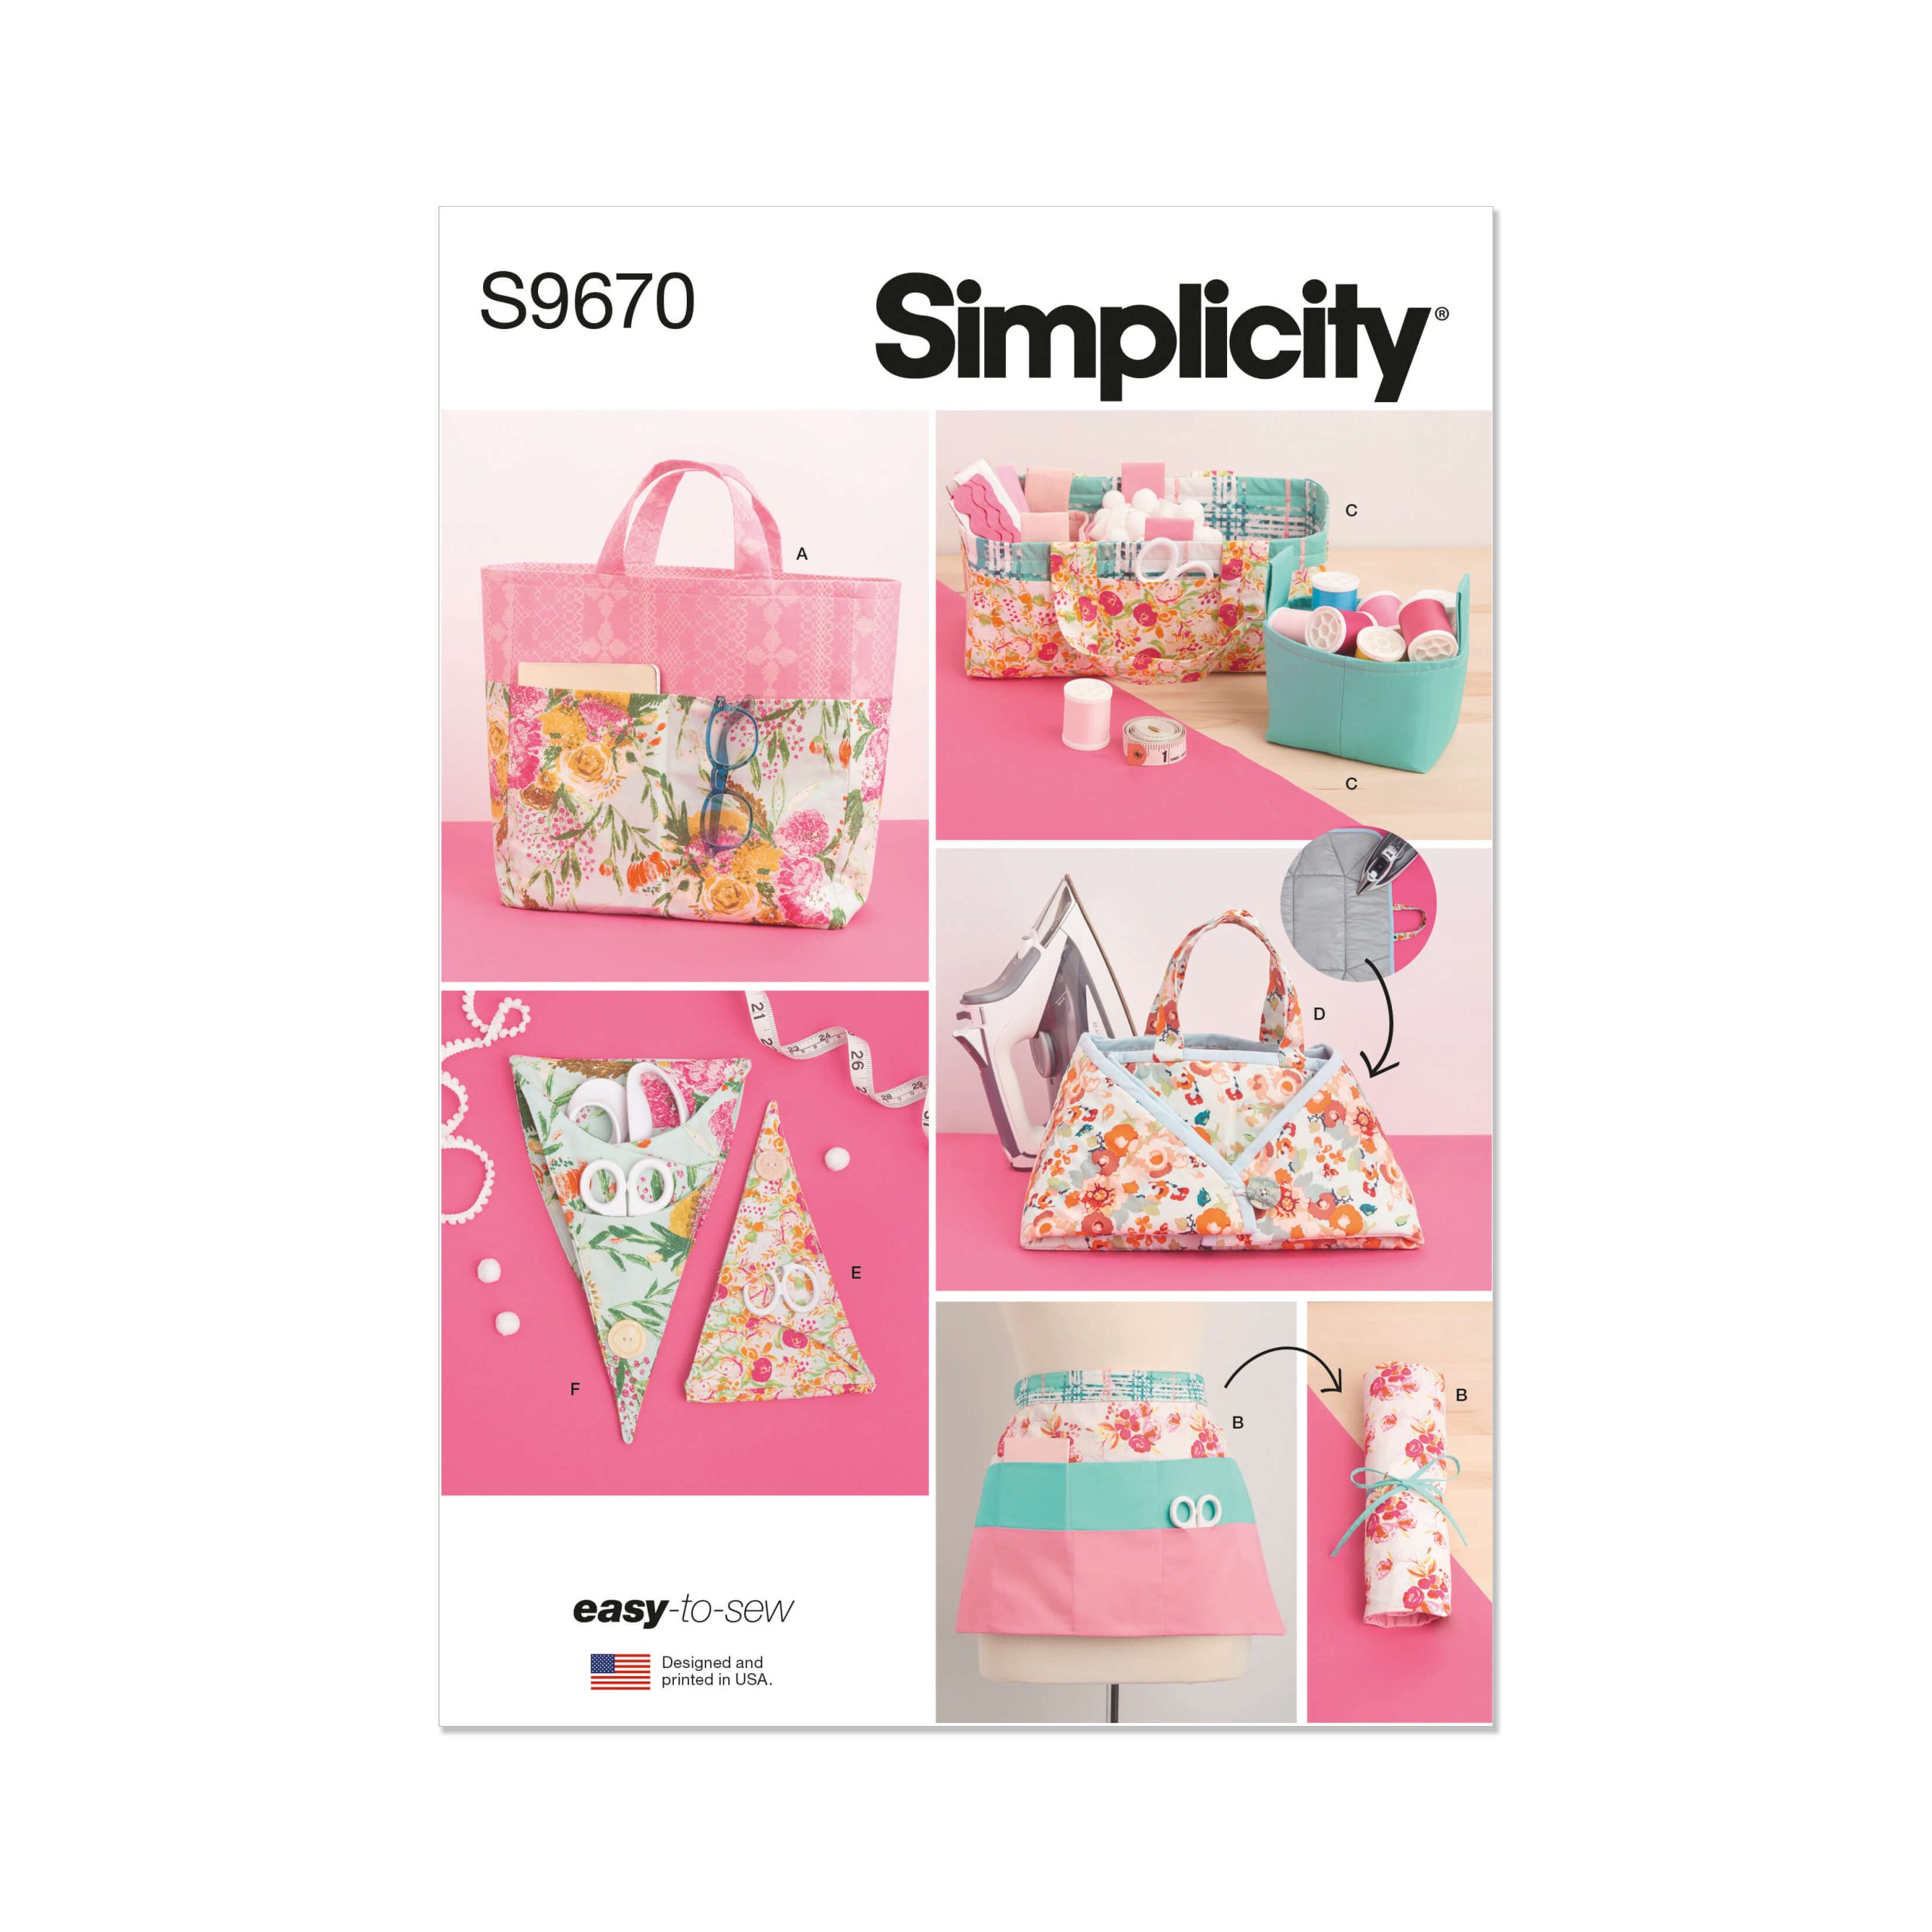 Simplicity Sewing Pattern S9670 Sewing Room Accessories